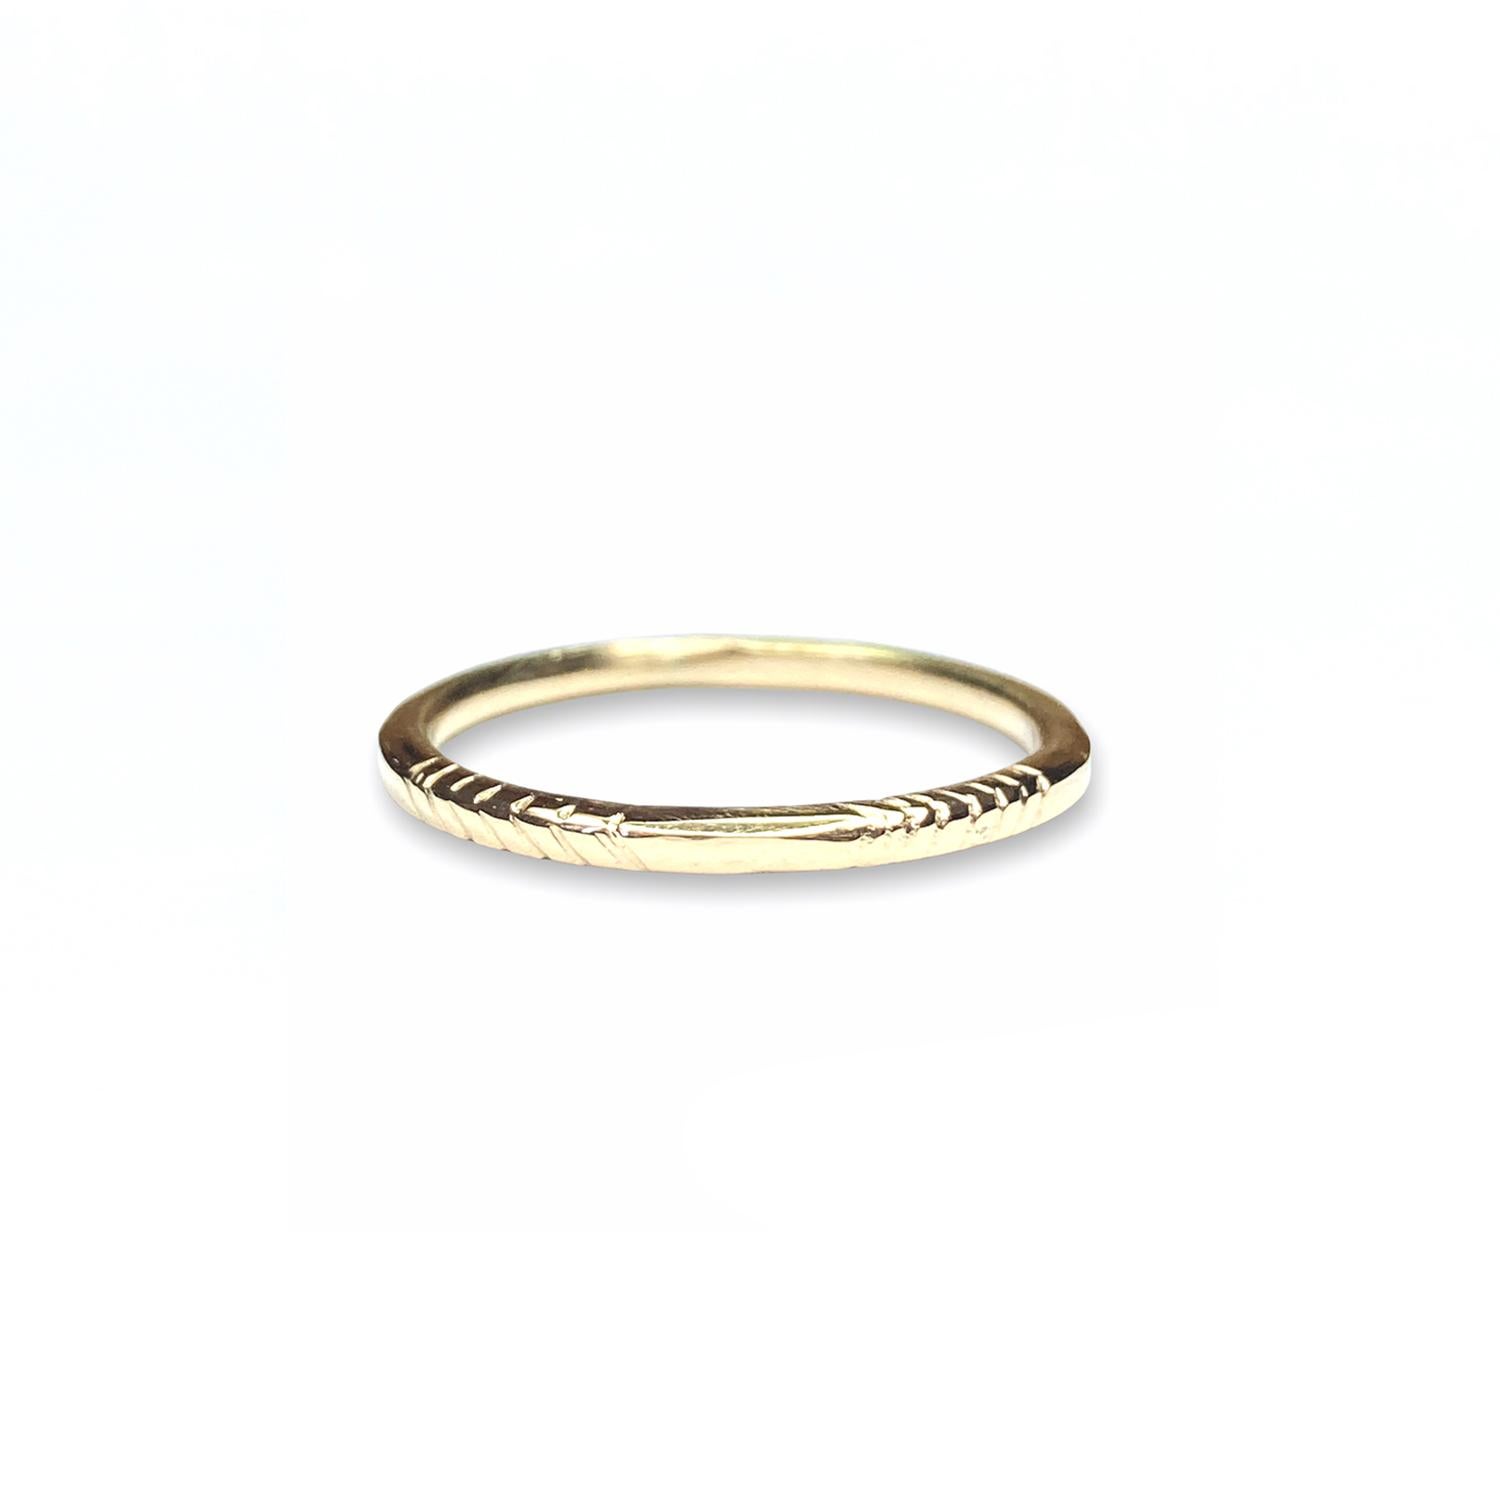 18 Karat Yellow Gold Twine Ring by Deborah Murdoch is part of the Ingrain Collection. The ring band has engraved lines on either side and comes in a polished finish.

Metal: 18 Karat Yellow Gold 
Ring Band Dimensions: Thickness 1.75mm
Ring Size: